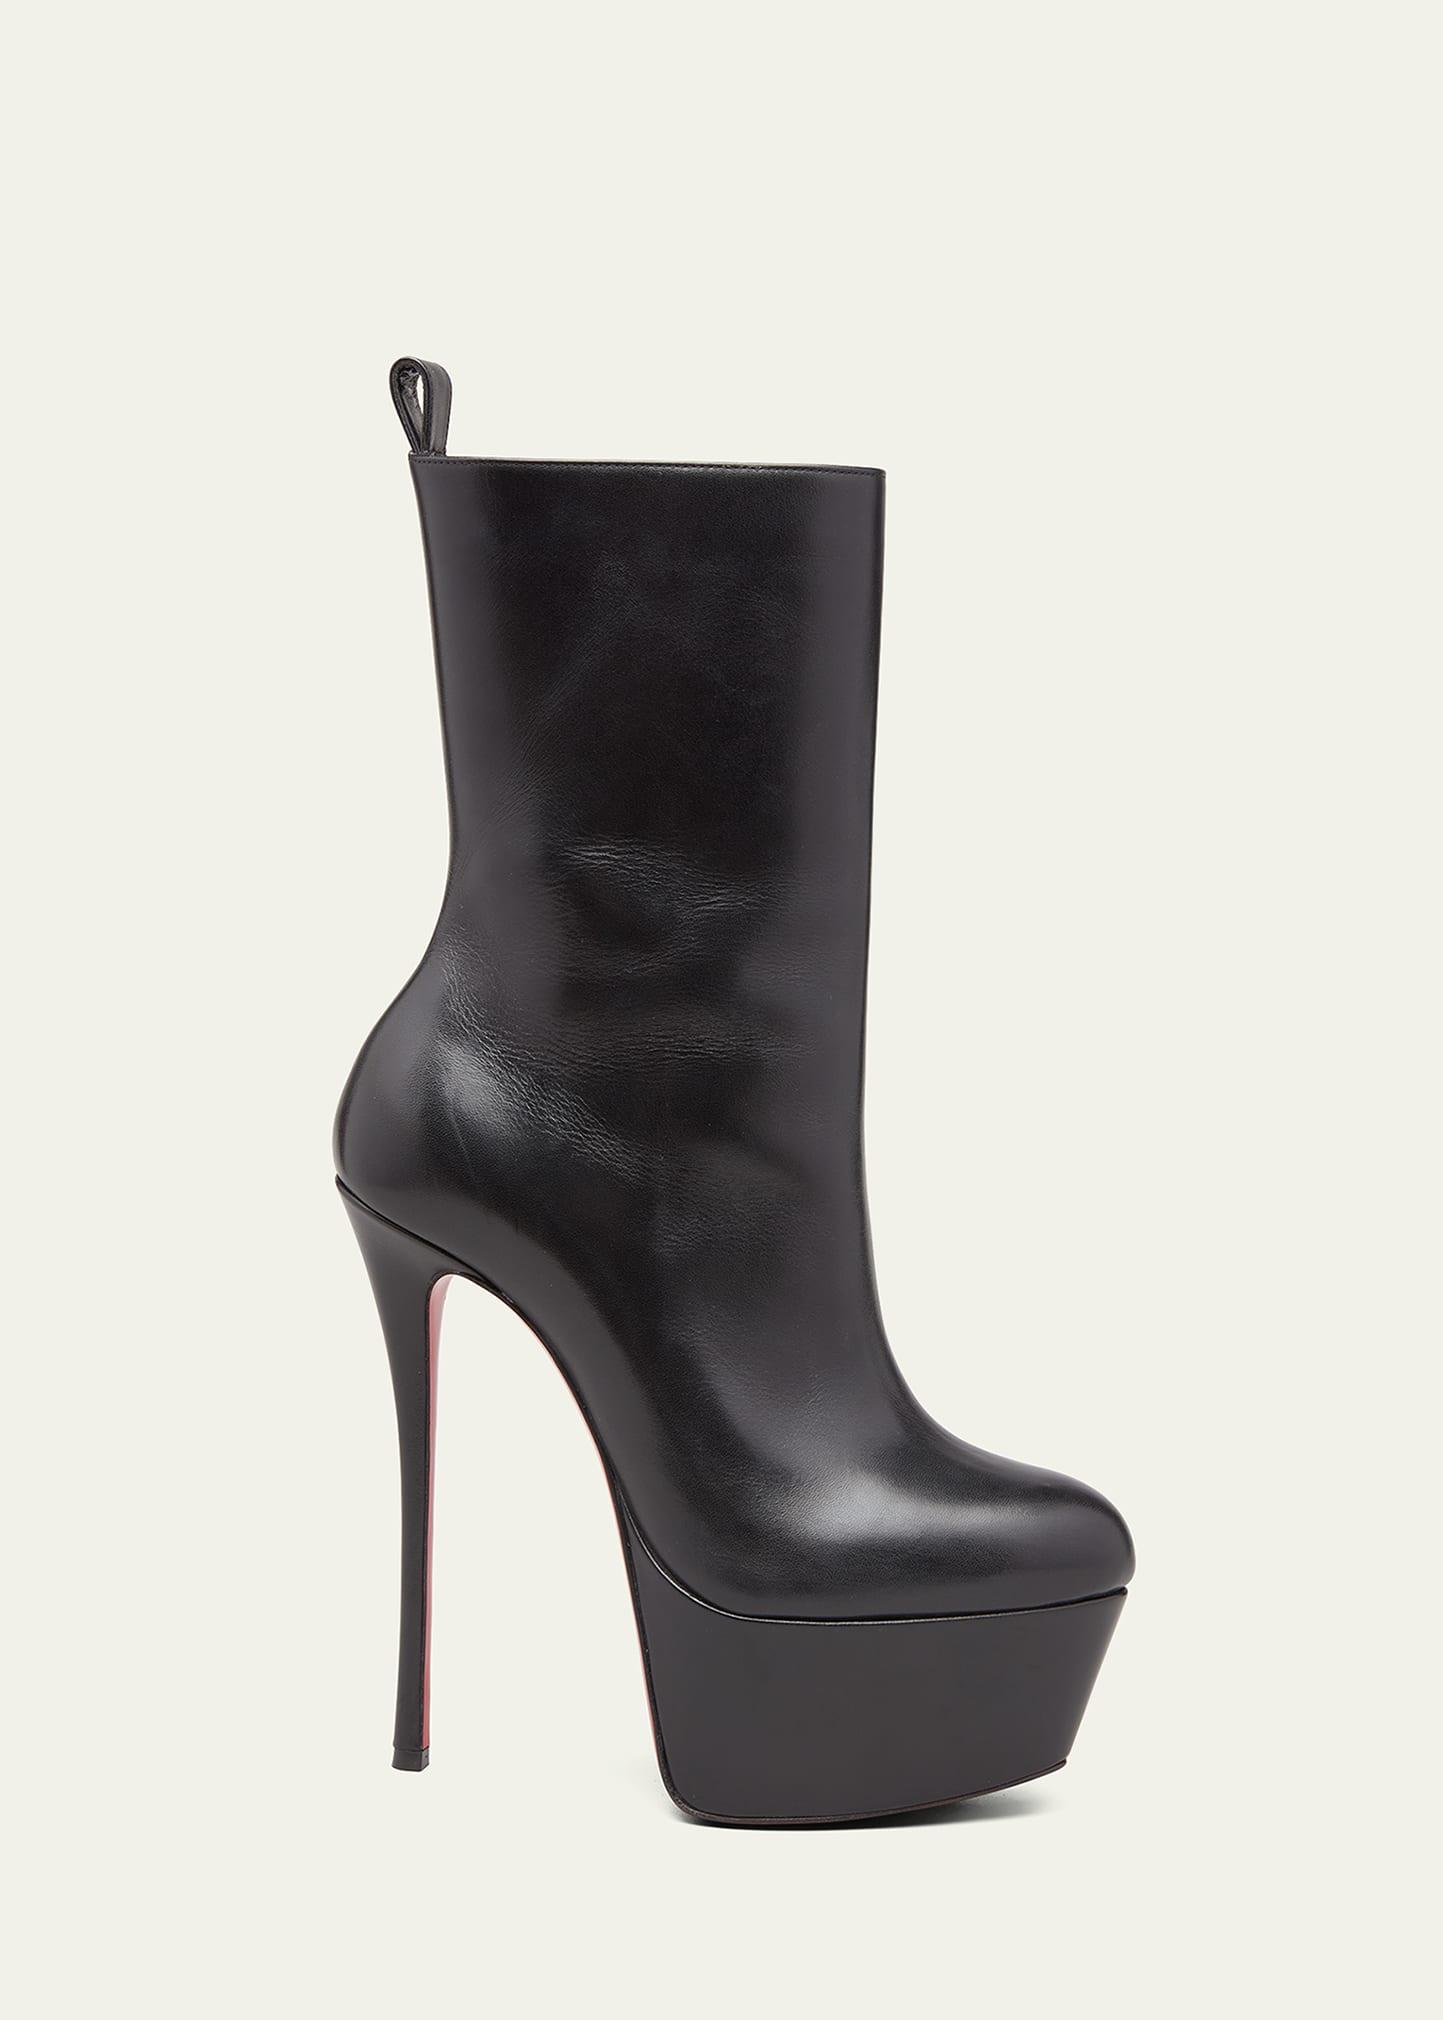 Christian Louboutin Dolly Booty Alta 160 Leather Platform Boots in ...